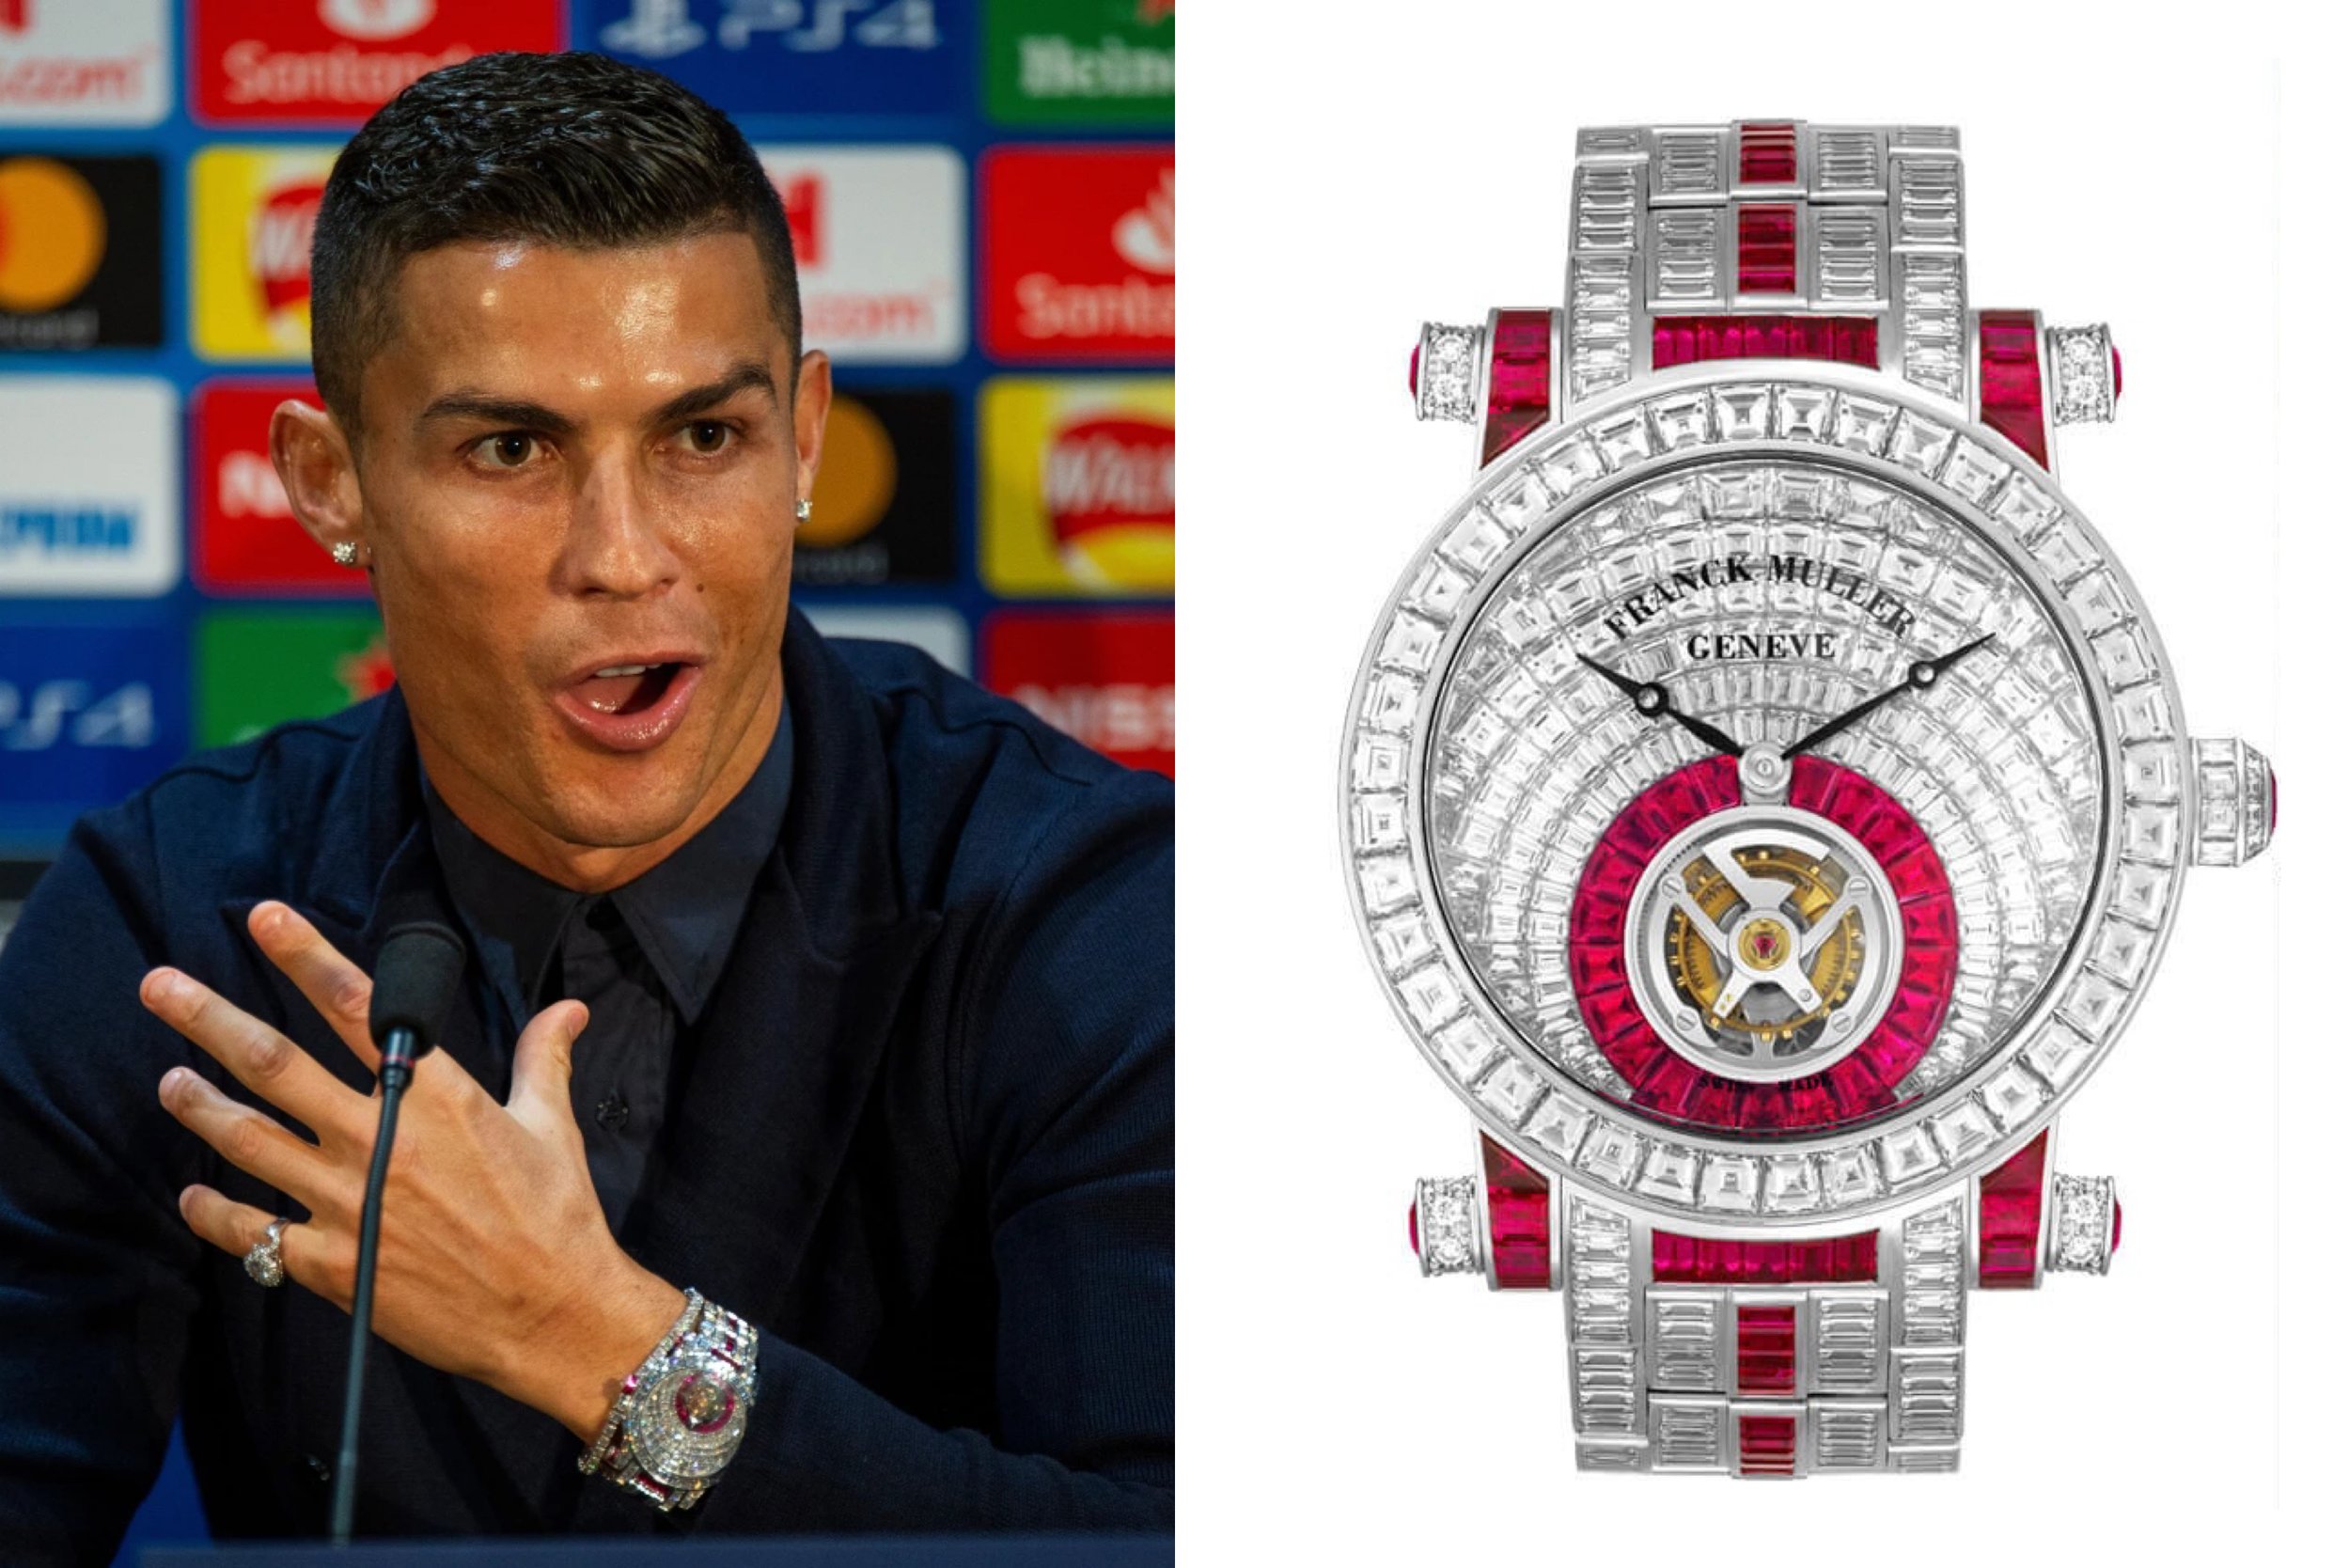 Cristiano Ronaldo's watch collection kicks all others out of the park